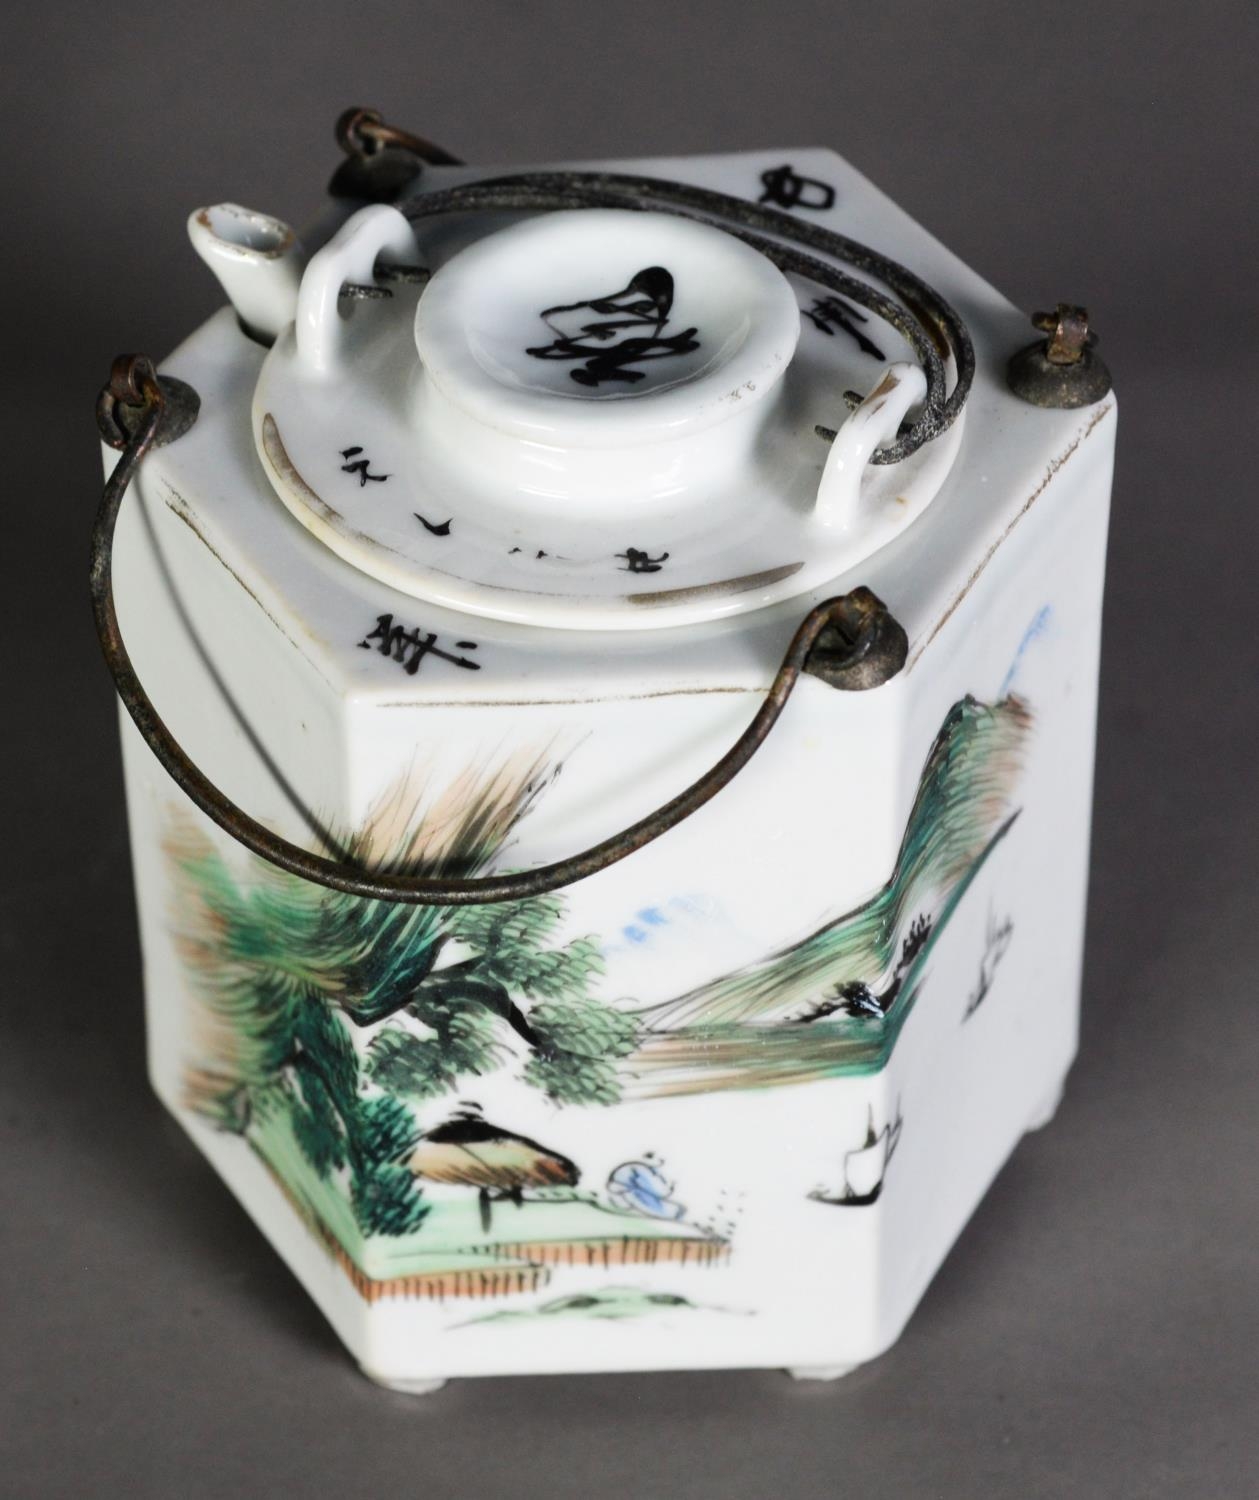 20th CENTURY CHINESE PORCELAIN SMALL CYLINDRICAL TEAPOT standing in a hexagonal hot water reservoir, - Image 2 of 4